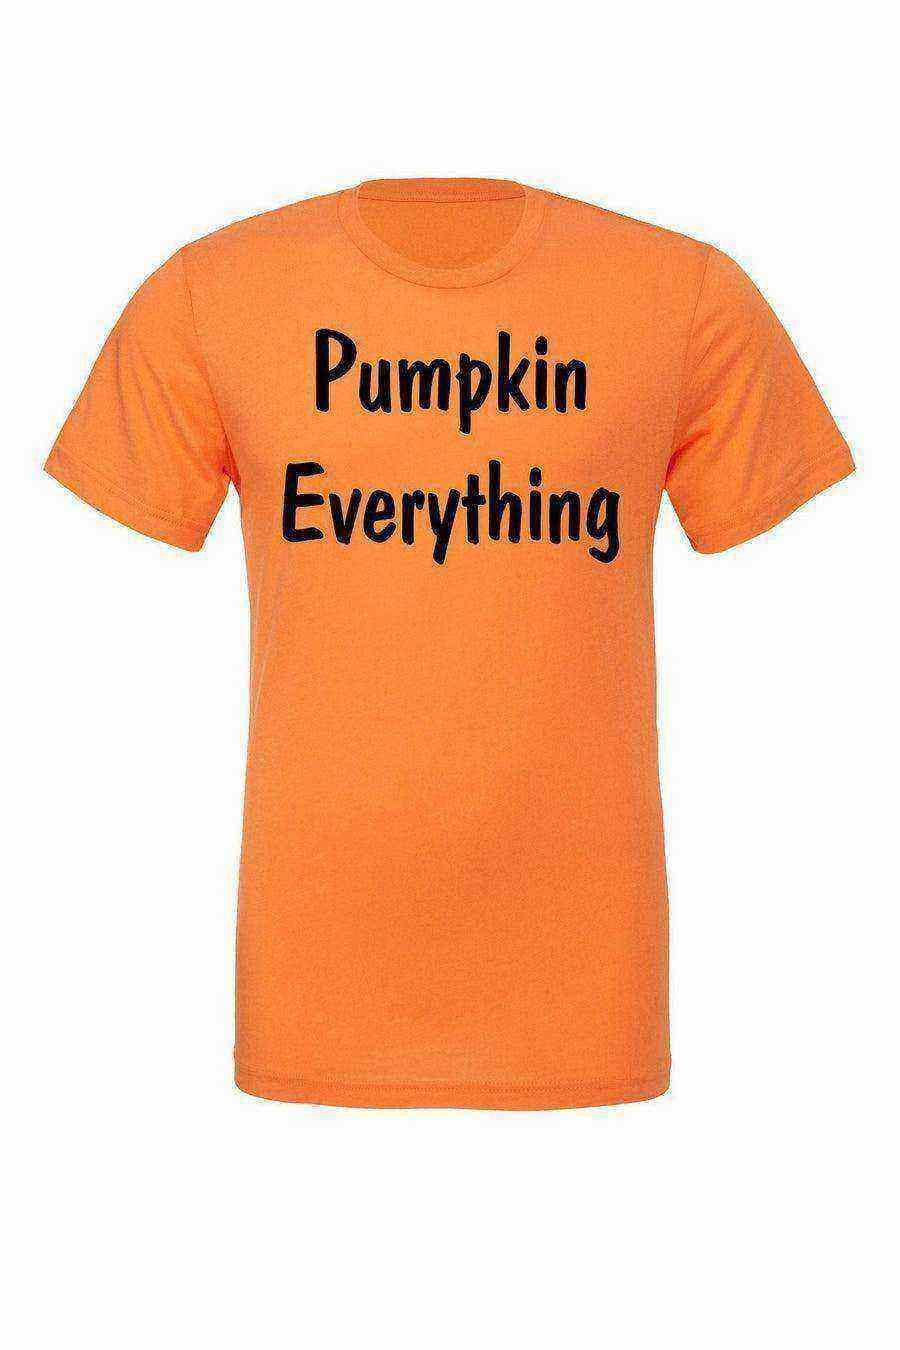 Youth | Pumpkin Everything Shirt | Fall Tee - Dylan's Tees